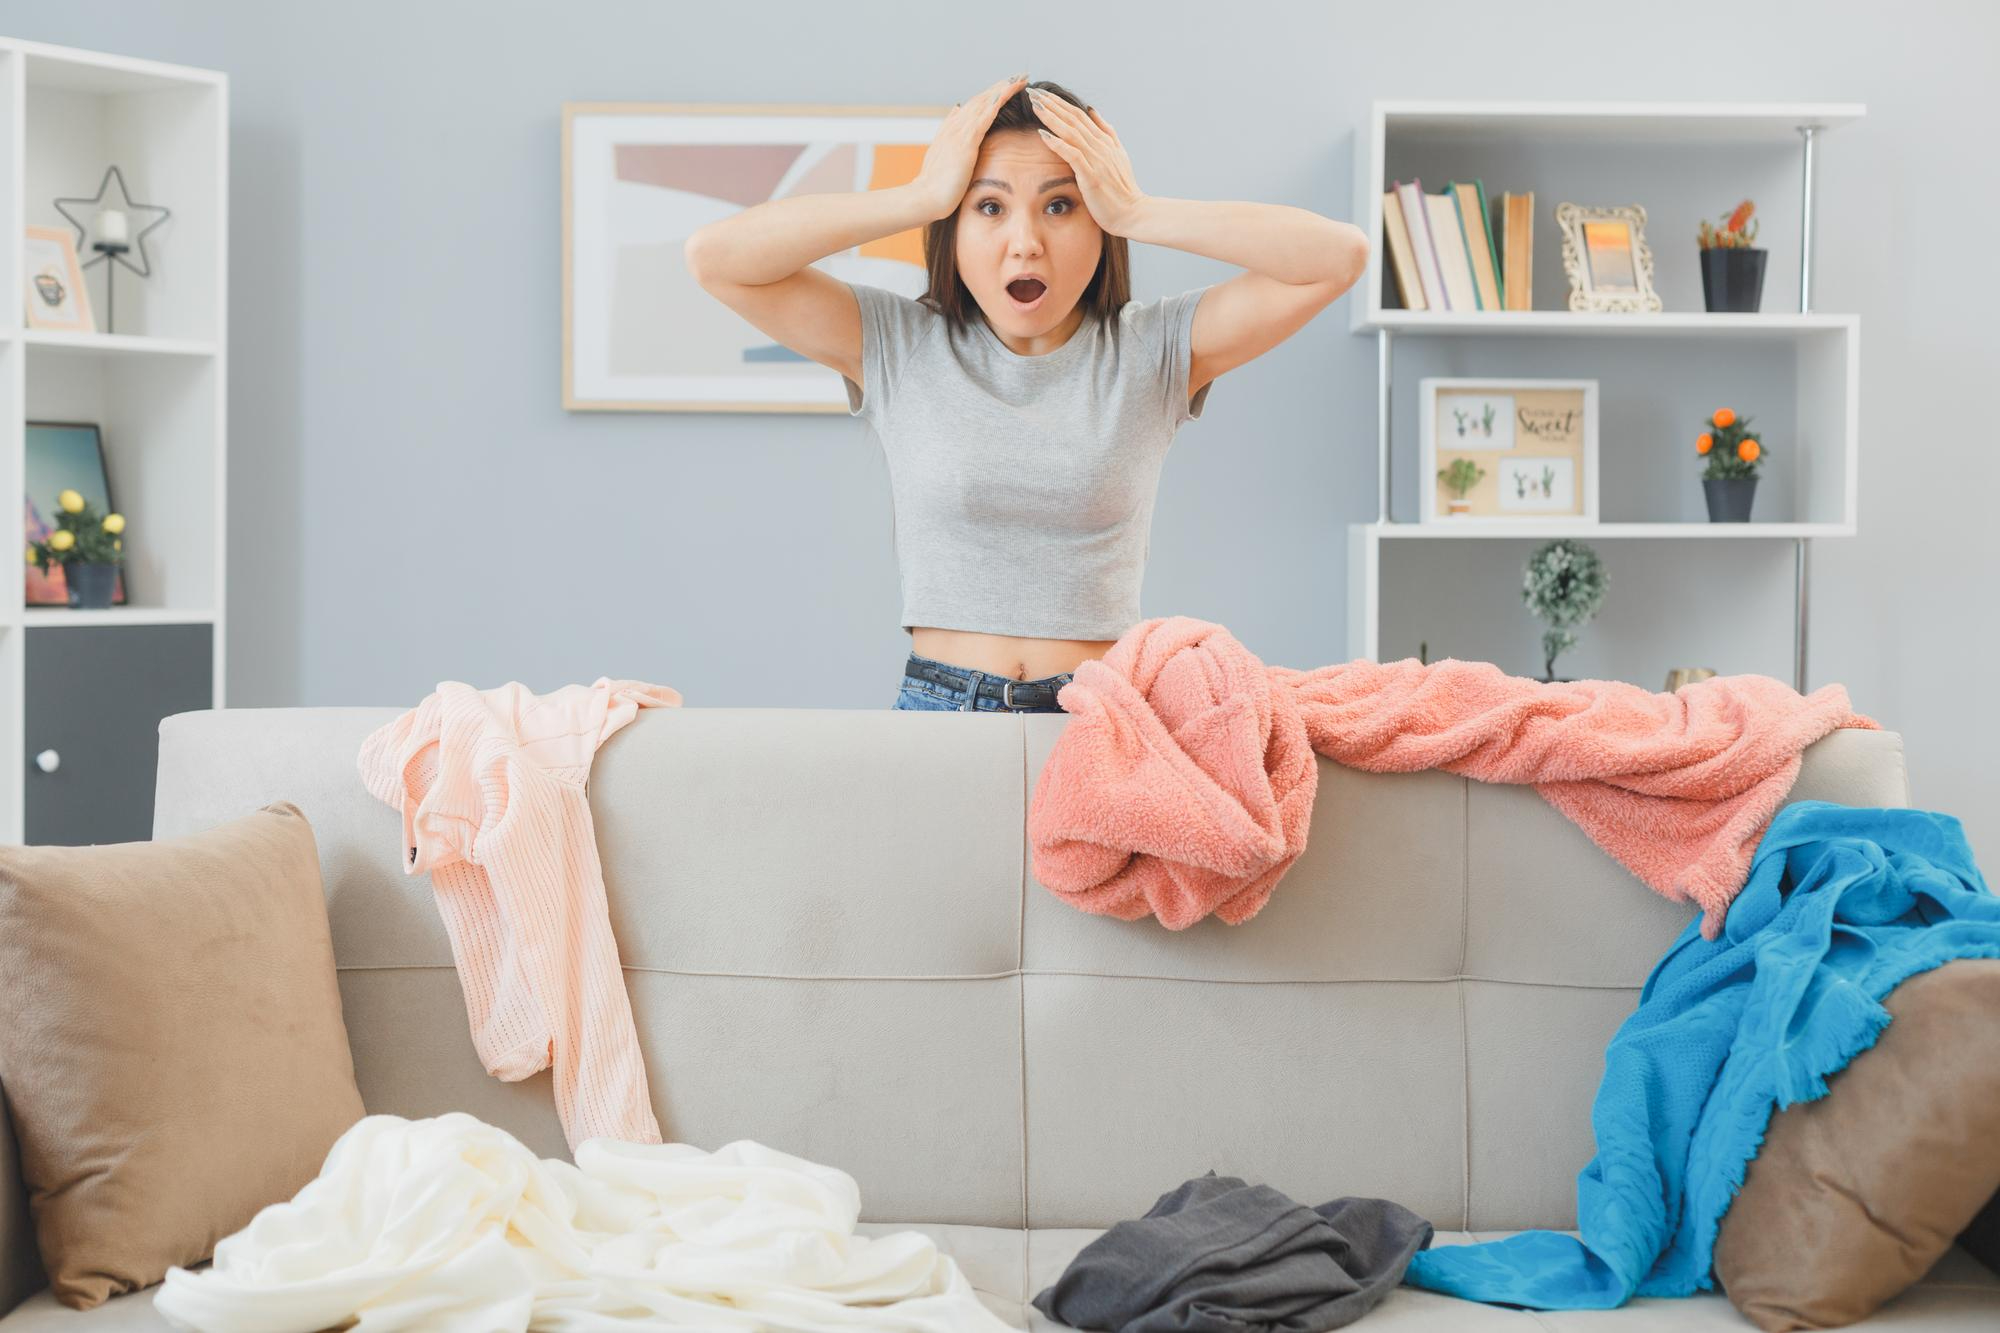 A shocked woman looking at clothes strewn all over in a living room | Source: Freepik